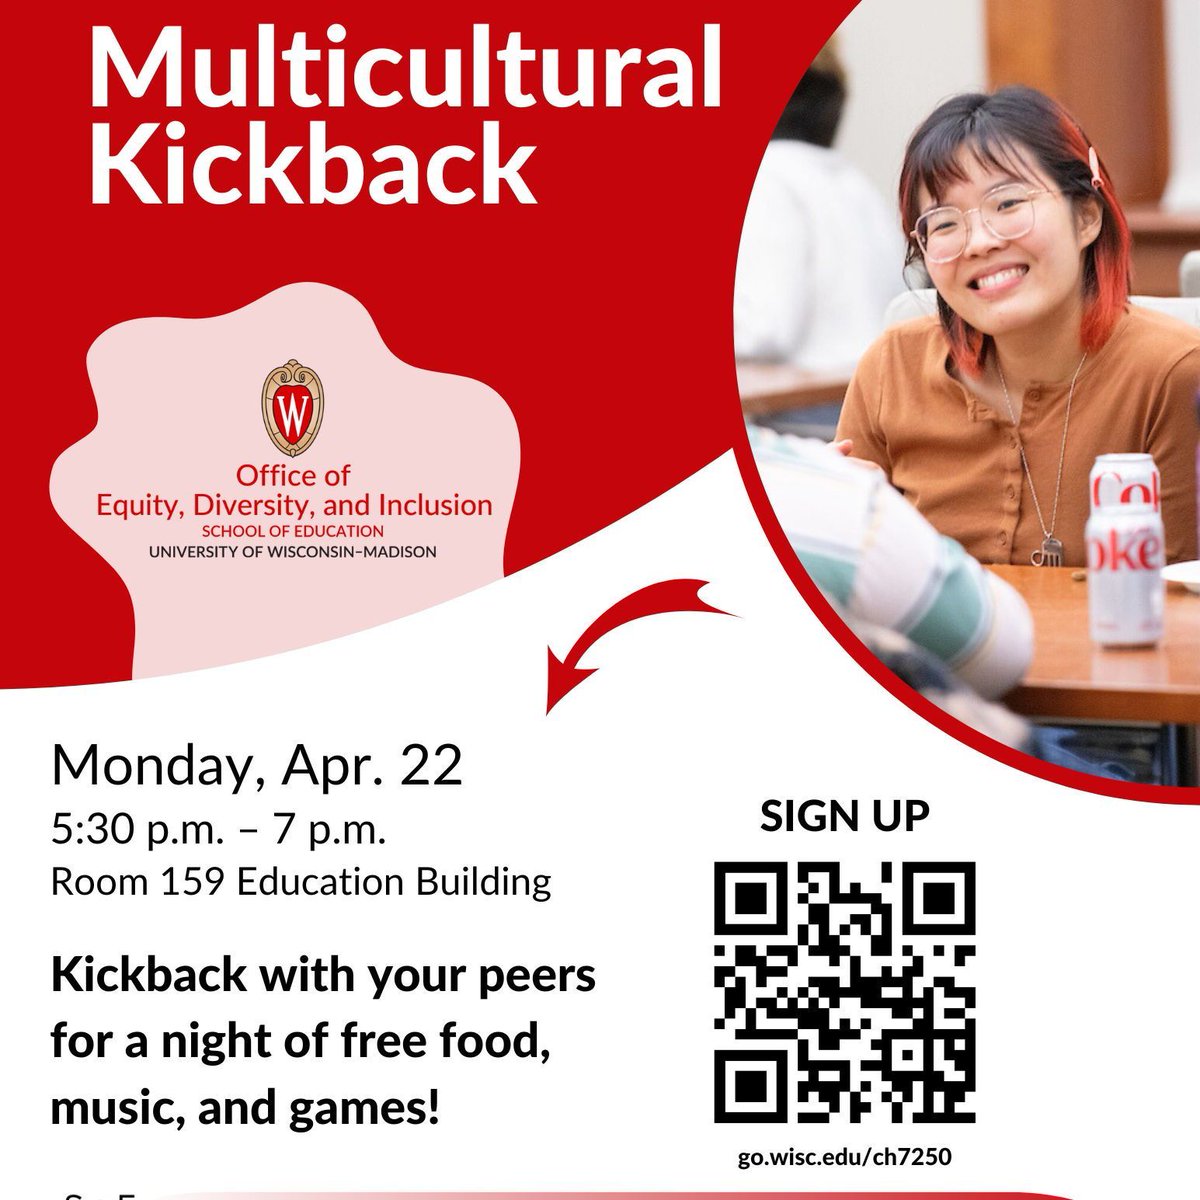 The Office of Equity Diversity and Inclusion invites SoE students to a Multicultural Kickback on Monday, April 22nd anytime between 5:30 pm and 7 pm in room 159 for free food and community with peers. Come when you want and leave when you want. RSVP: buff.ly/3TRqeWs